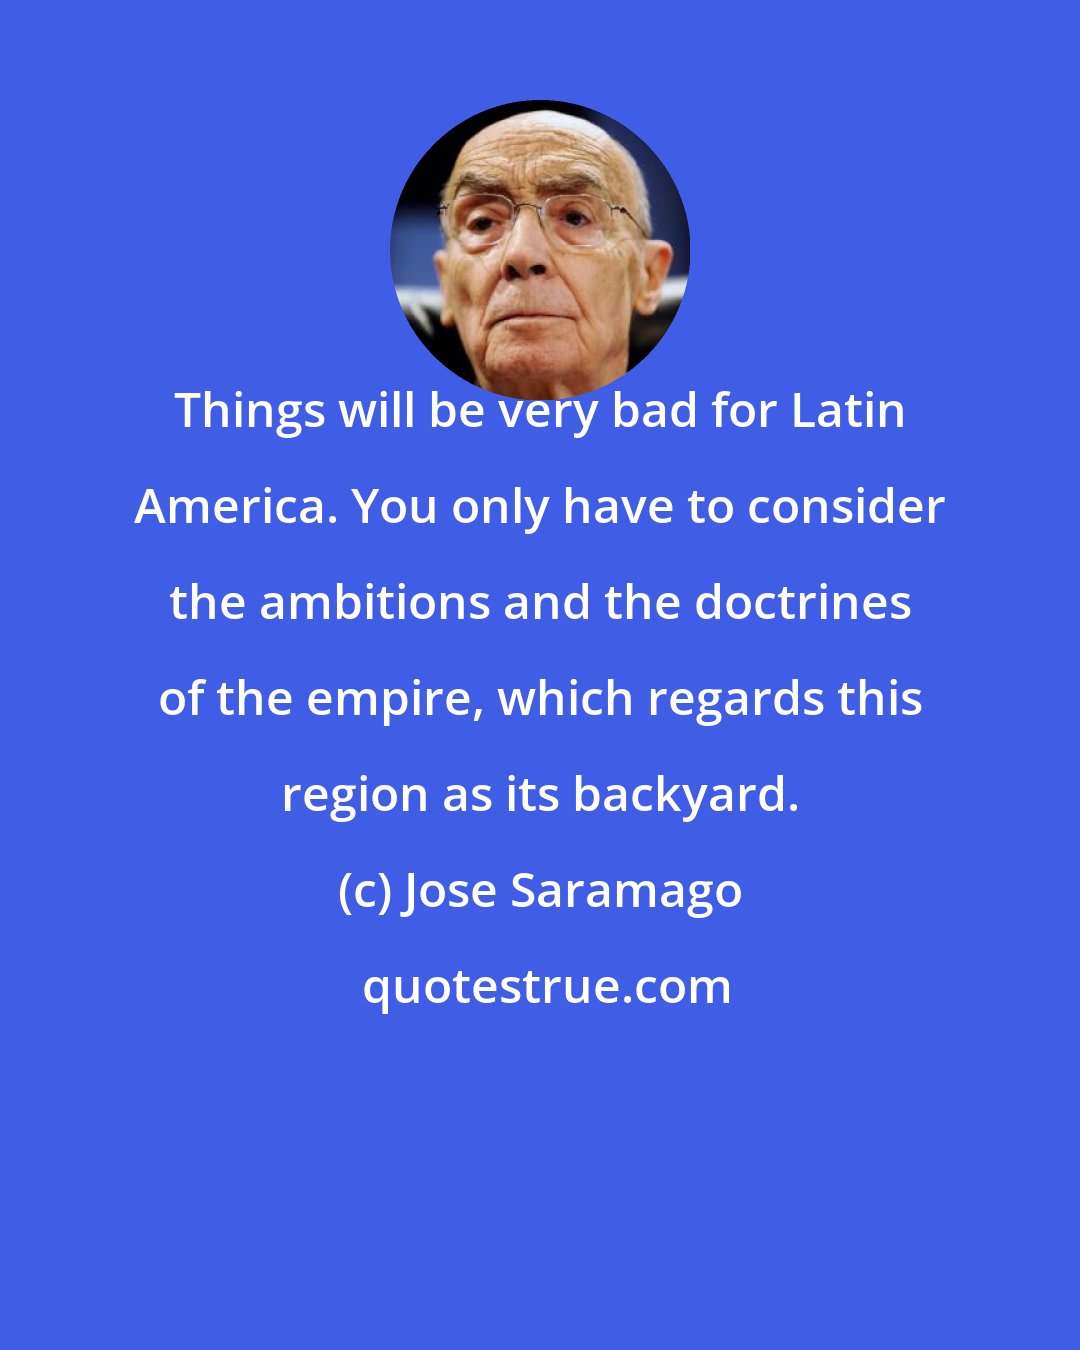 Jose Saramago: Things will be very bad for Latin America. You only have to consider the ambitions and the doctrines of the empire, which regards this region as its backyard.